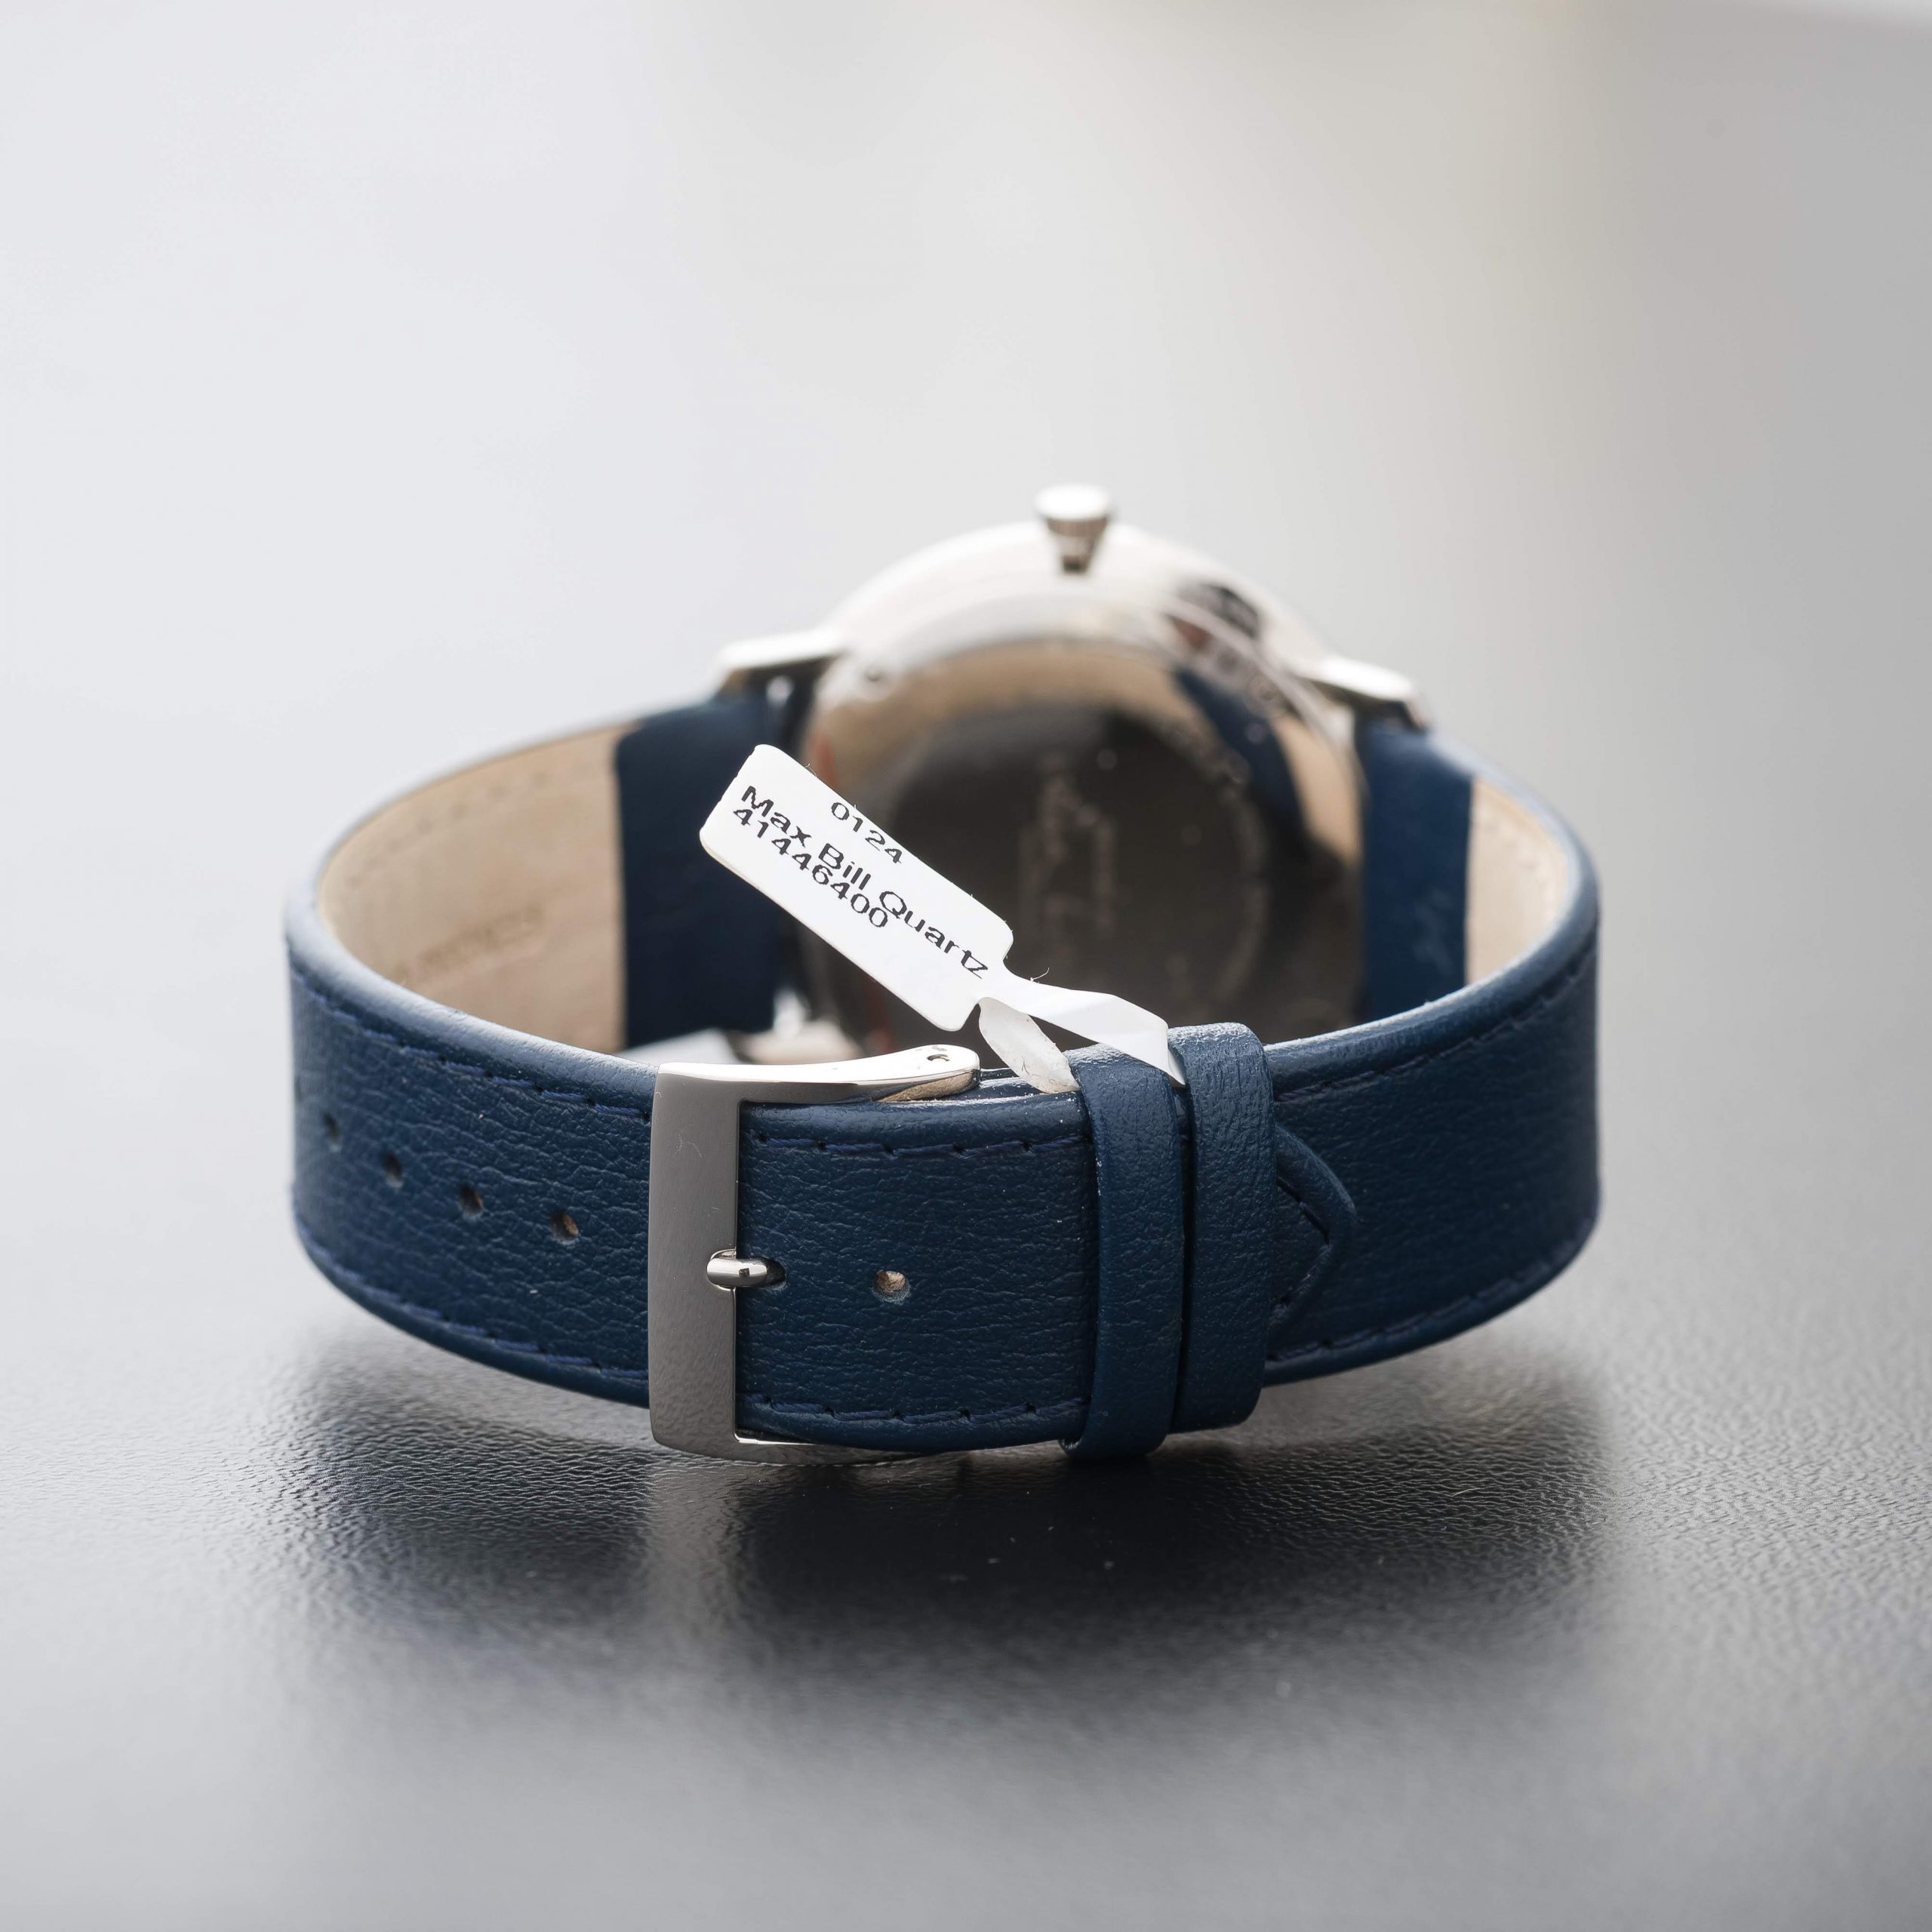 Junghans Max Bill Watch Quartz White Dial Date Blue leather watch 041/4464.00